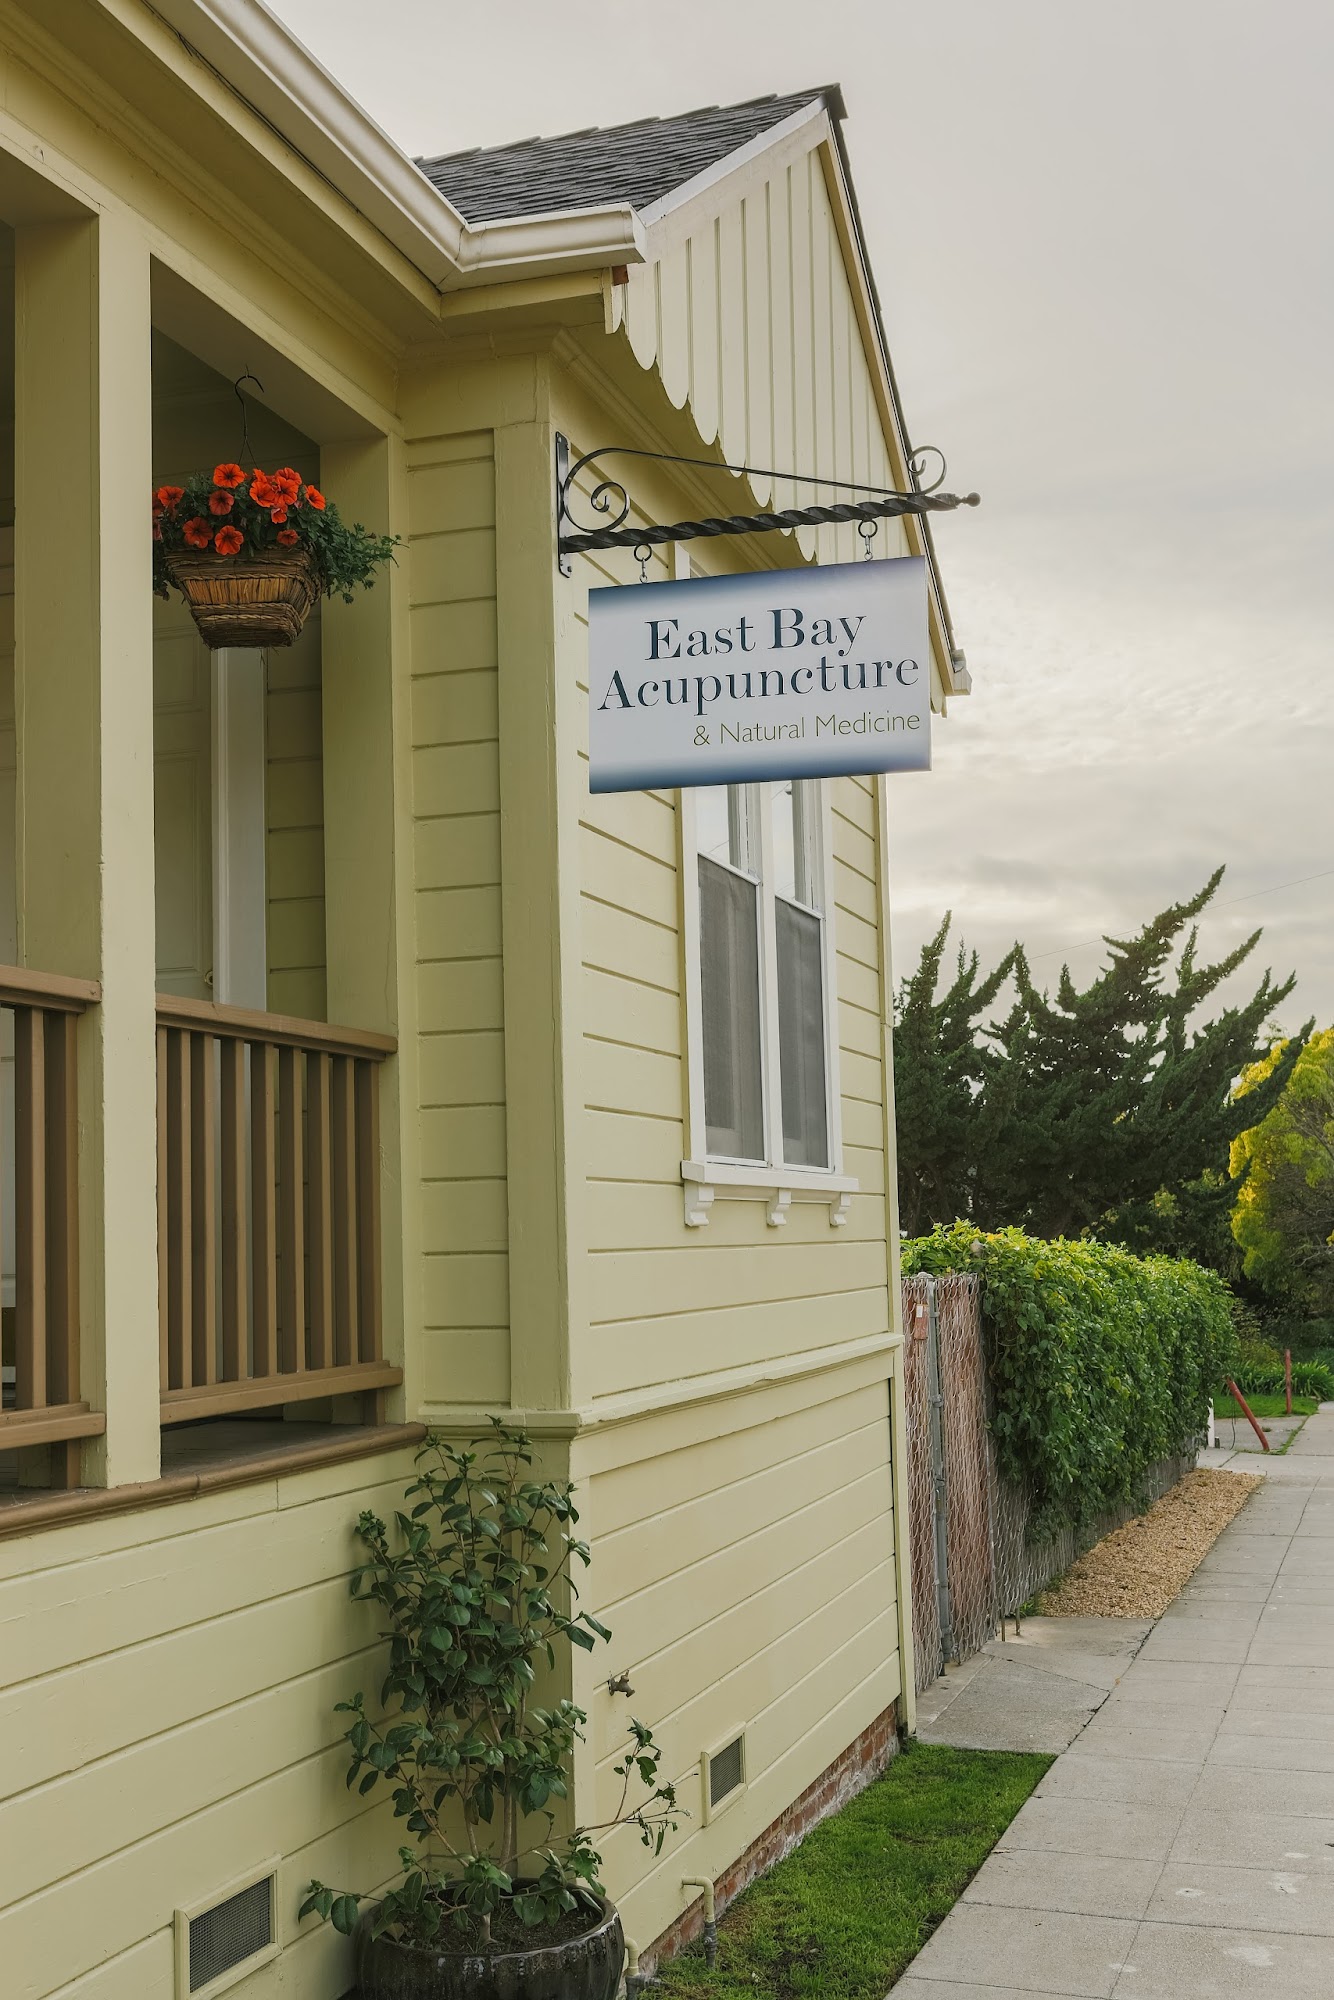 East Bay Acupuncture & Natural Medicine